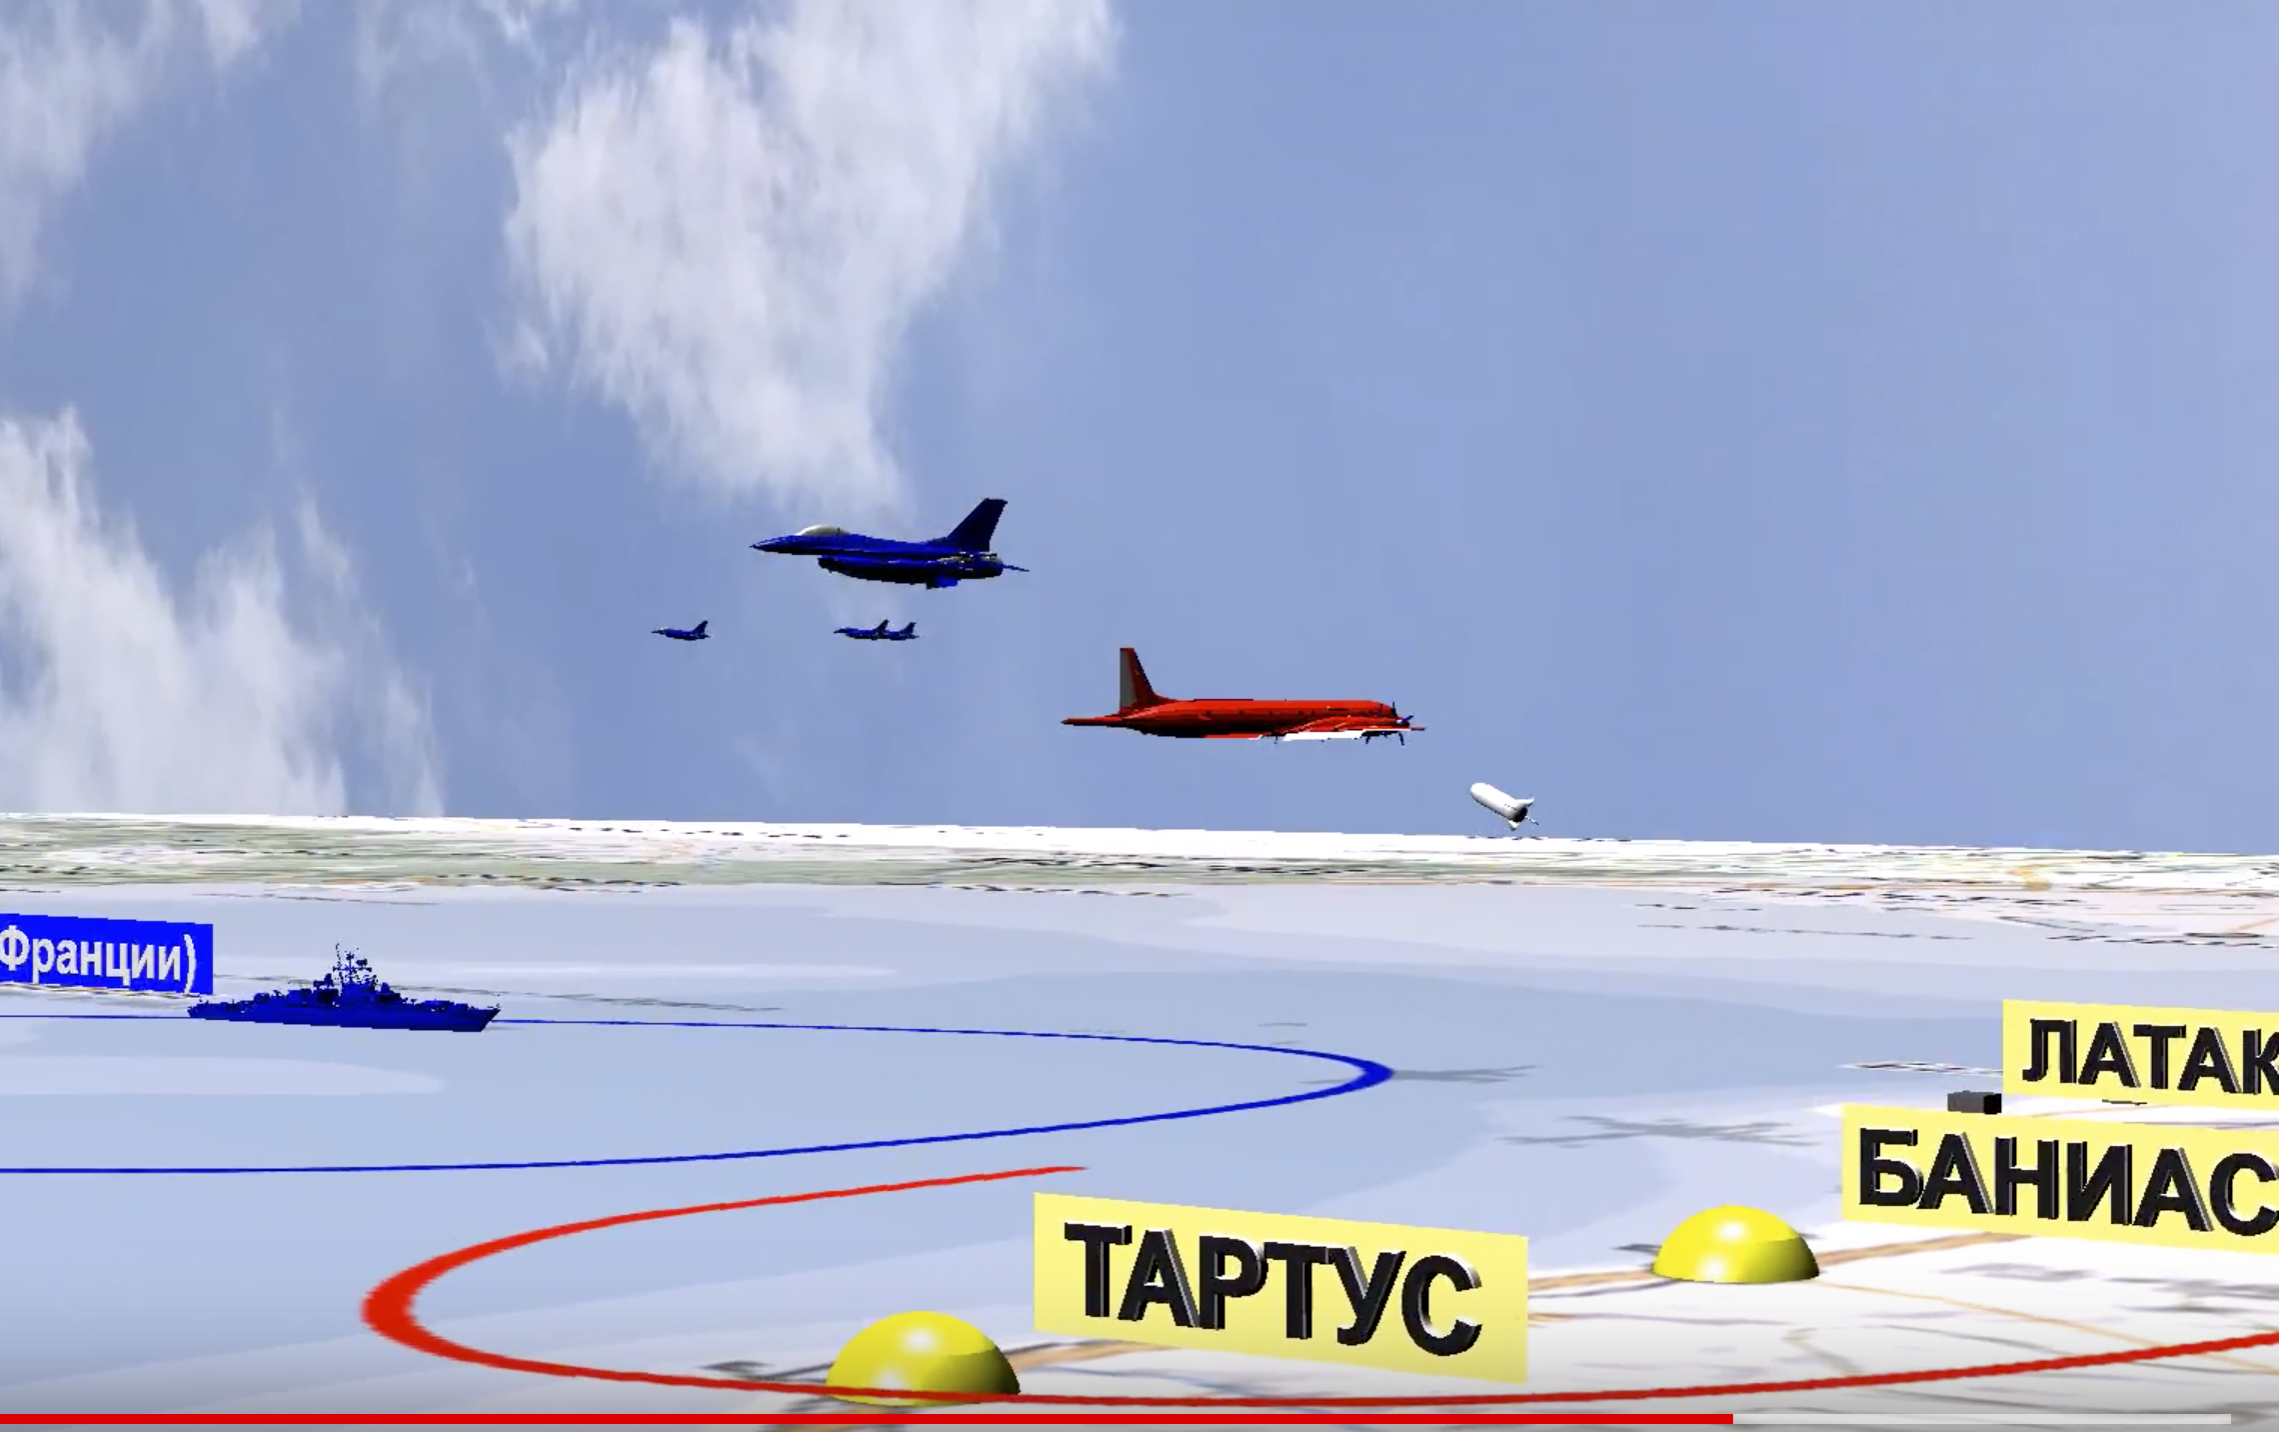 A computer simulation purports to show Israeli jets near to the Russian reconnaissance plane shown in red before it was accidentally shot down